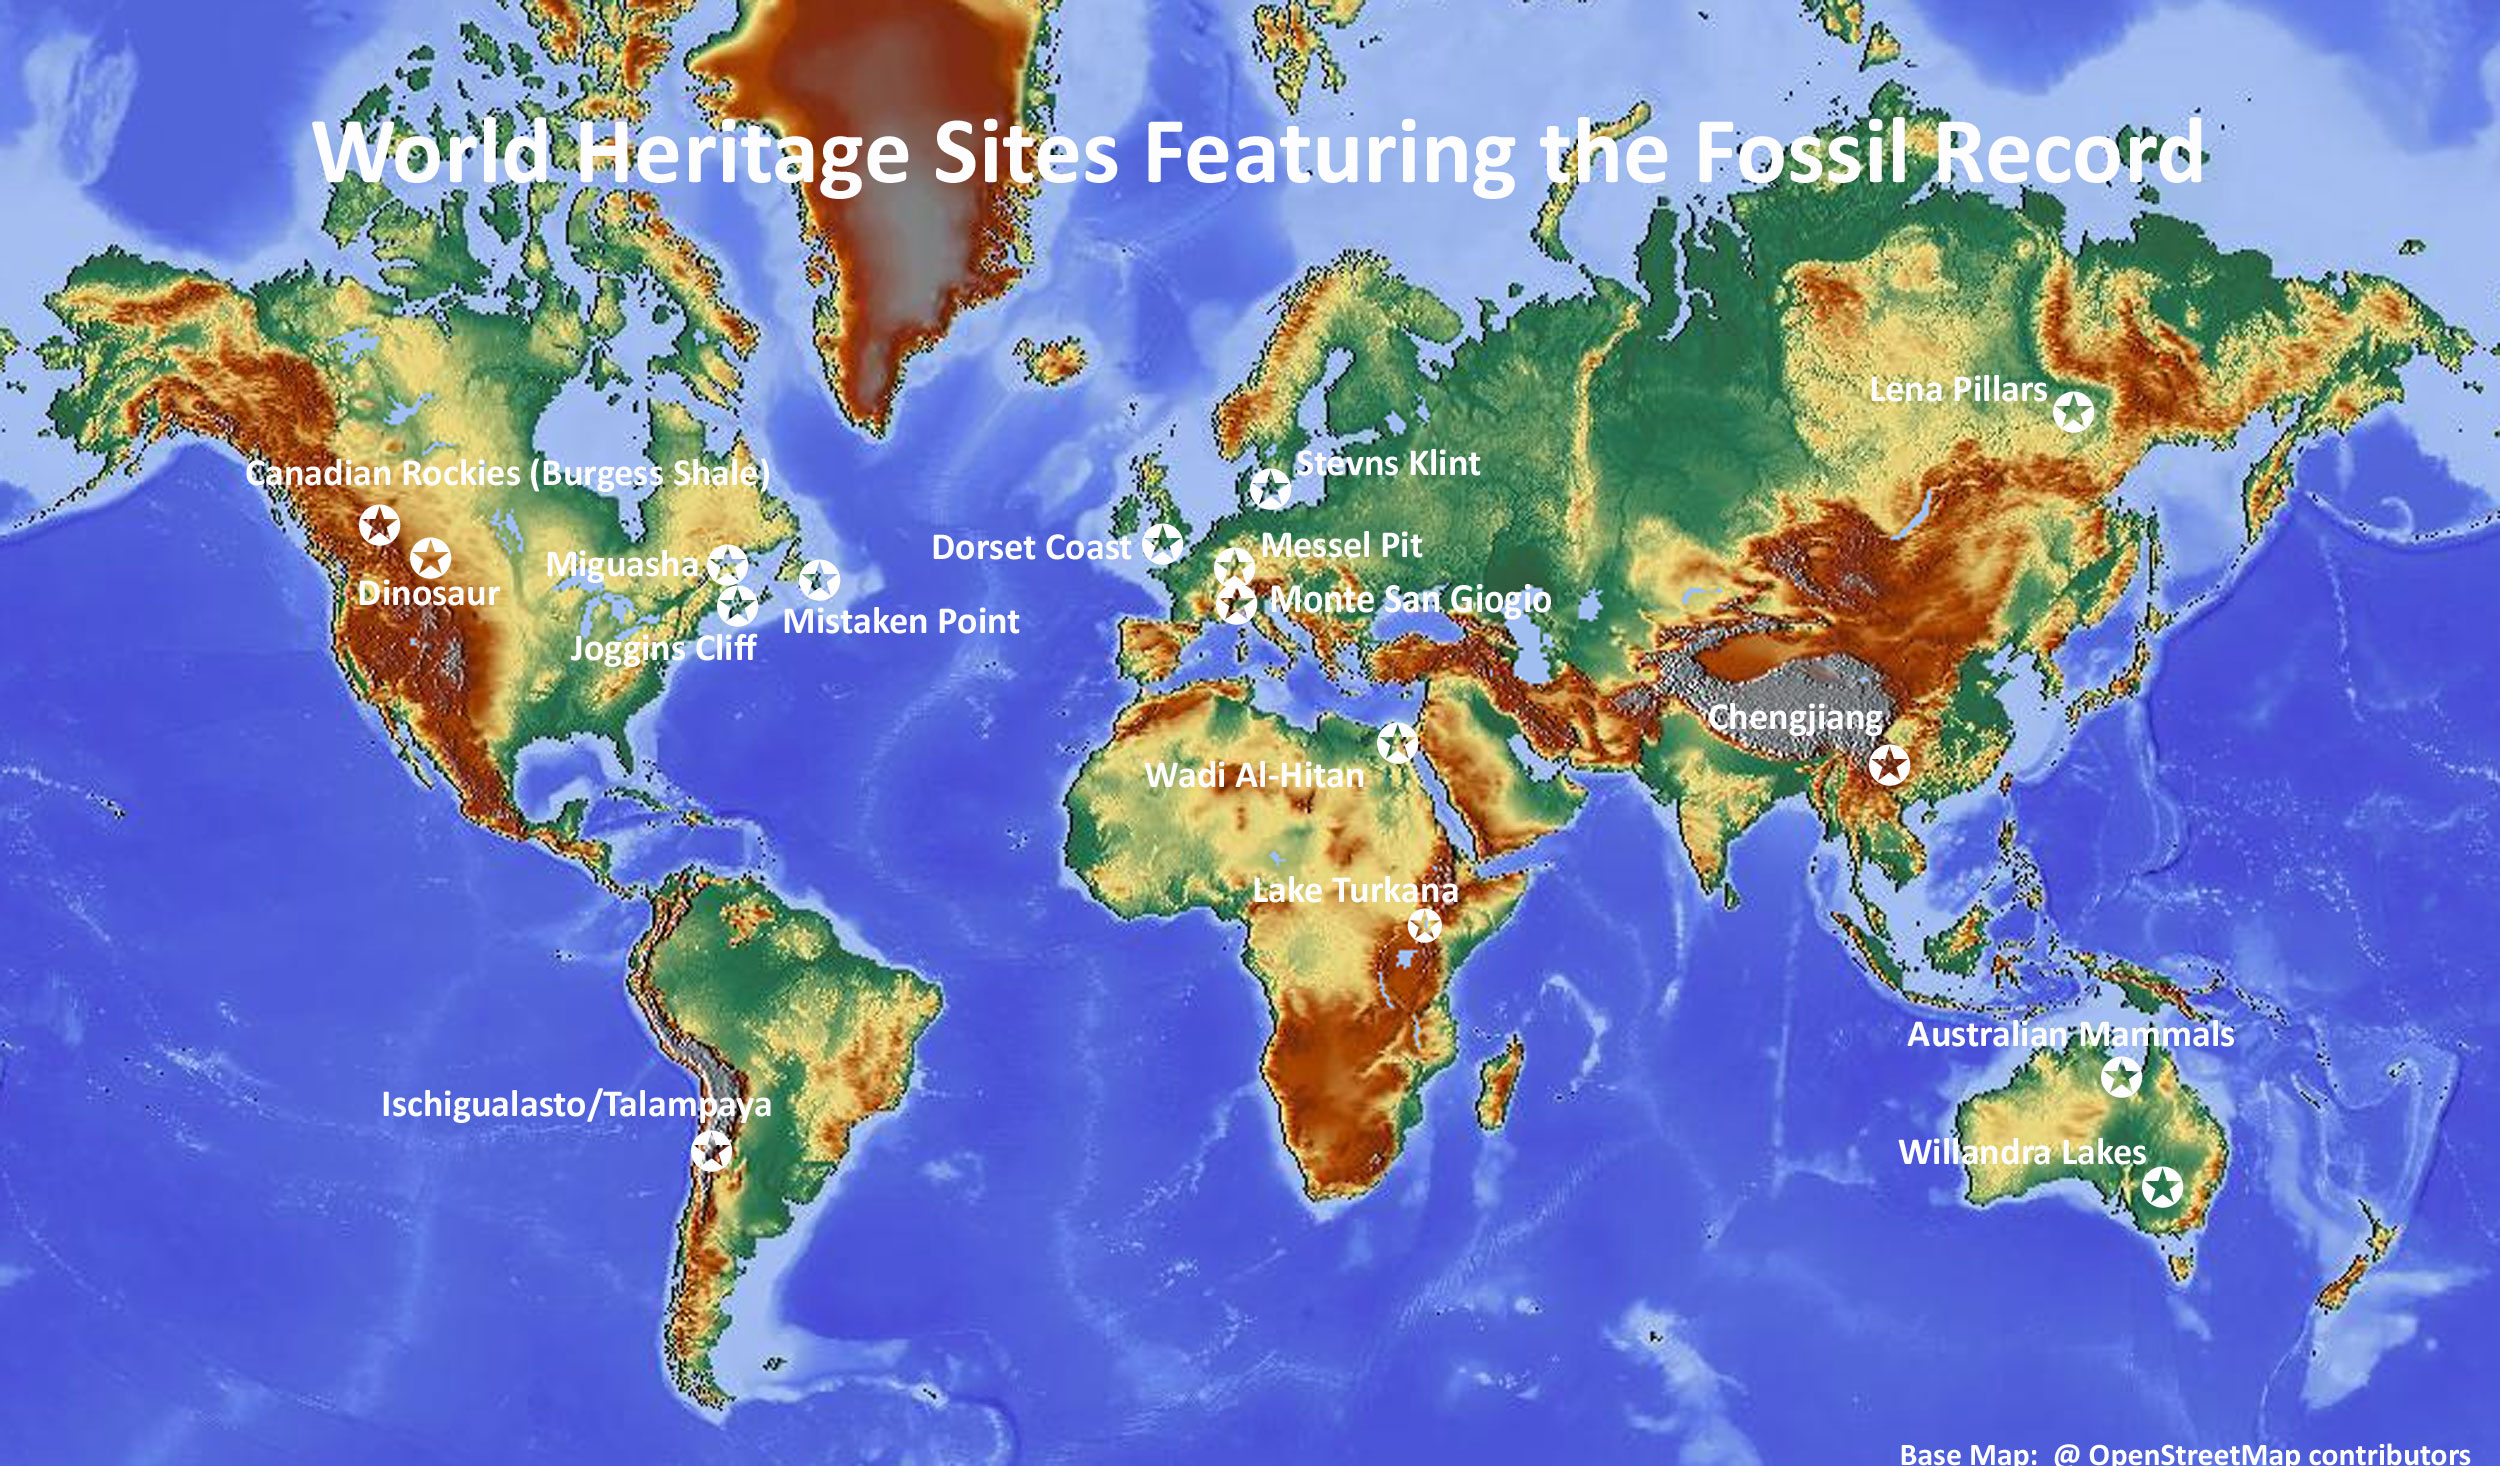 Map of world heritage fossil record sites